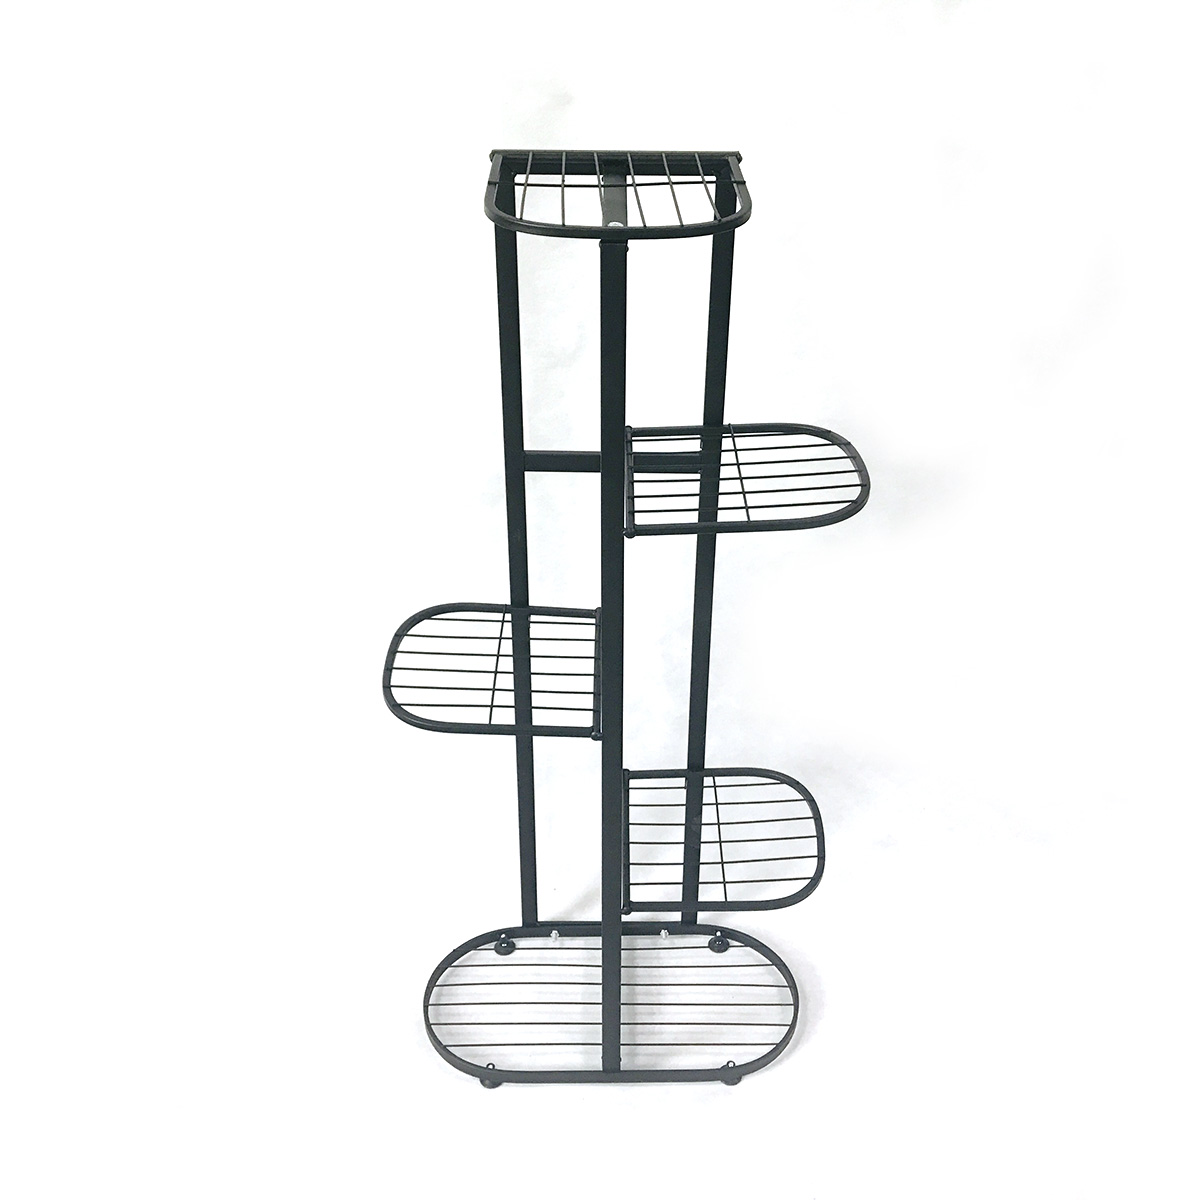 Find 6 Tire Metal Plant Stand Display Shelf Home Garden Ornaments Indoor /Outdoor for Sale on Gipsybee.com with cryptocurrencies